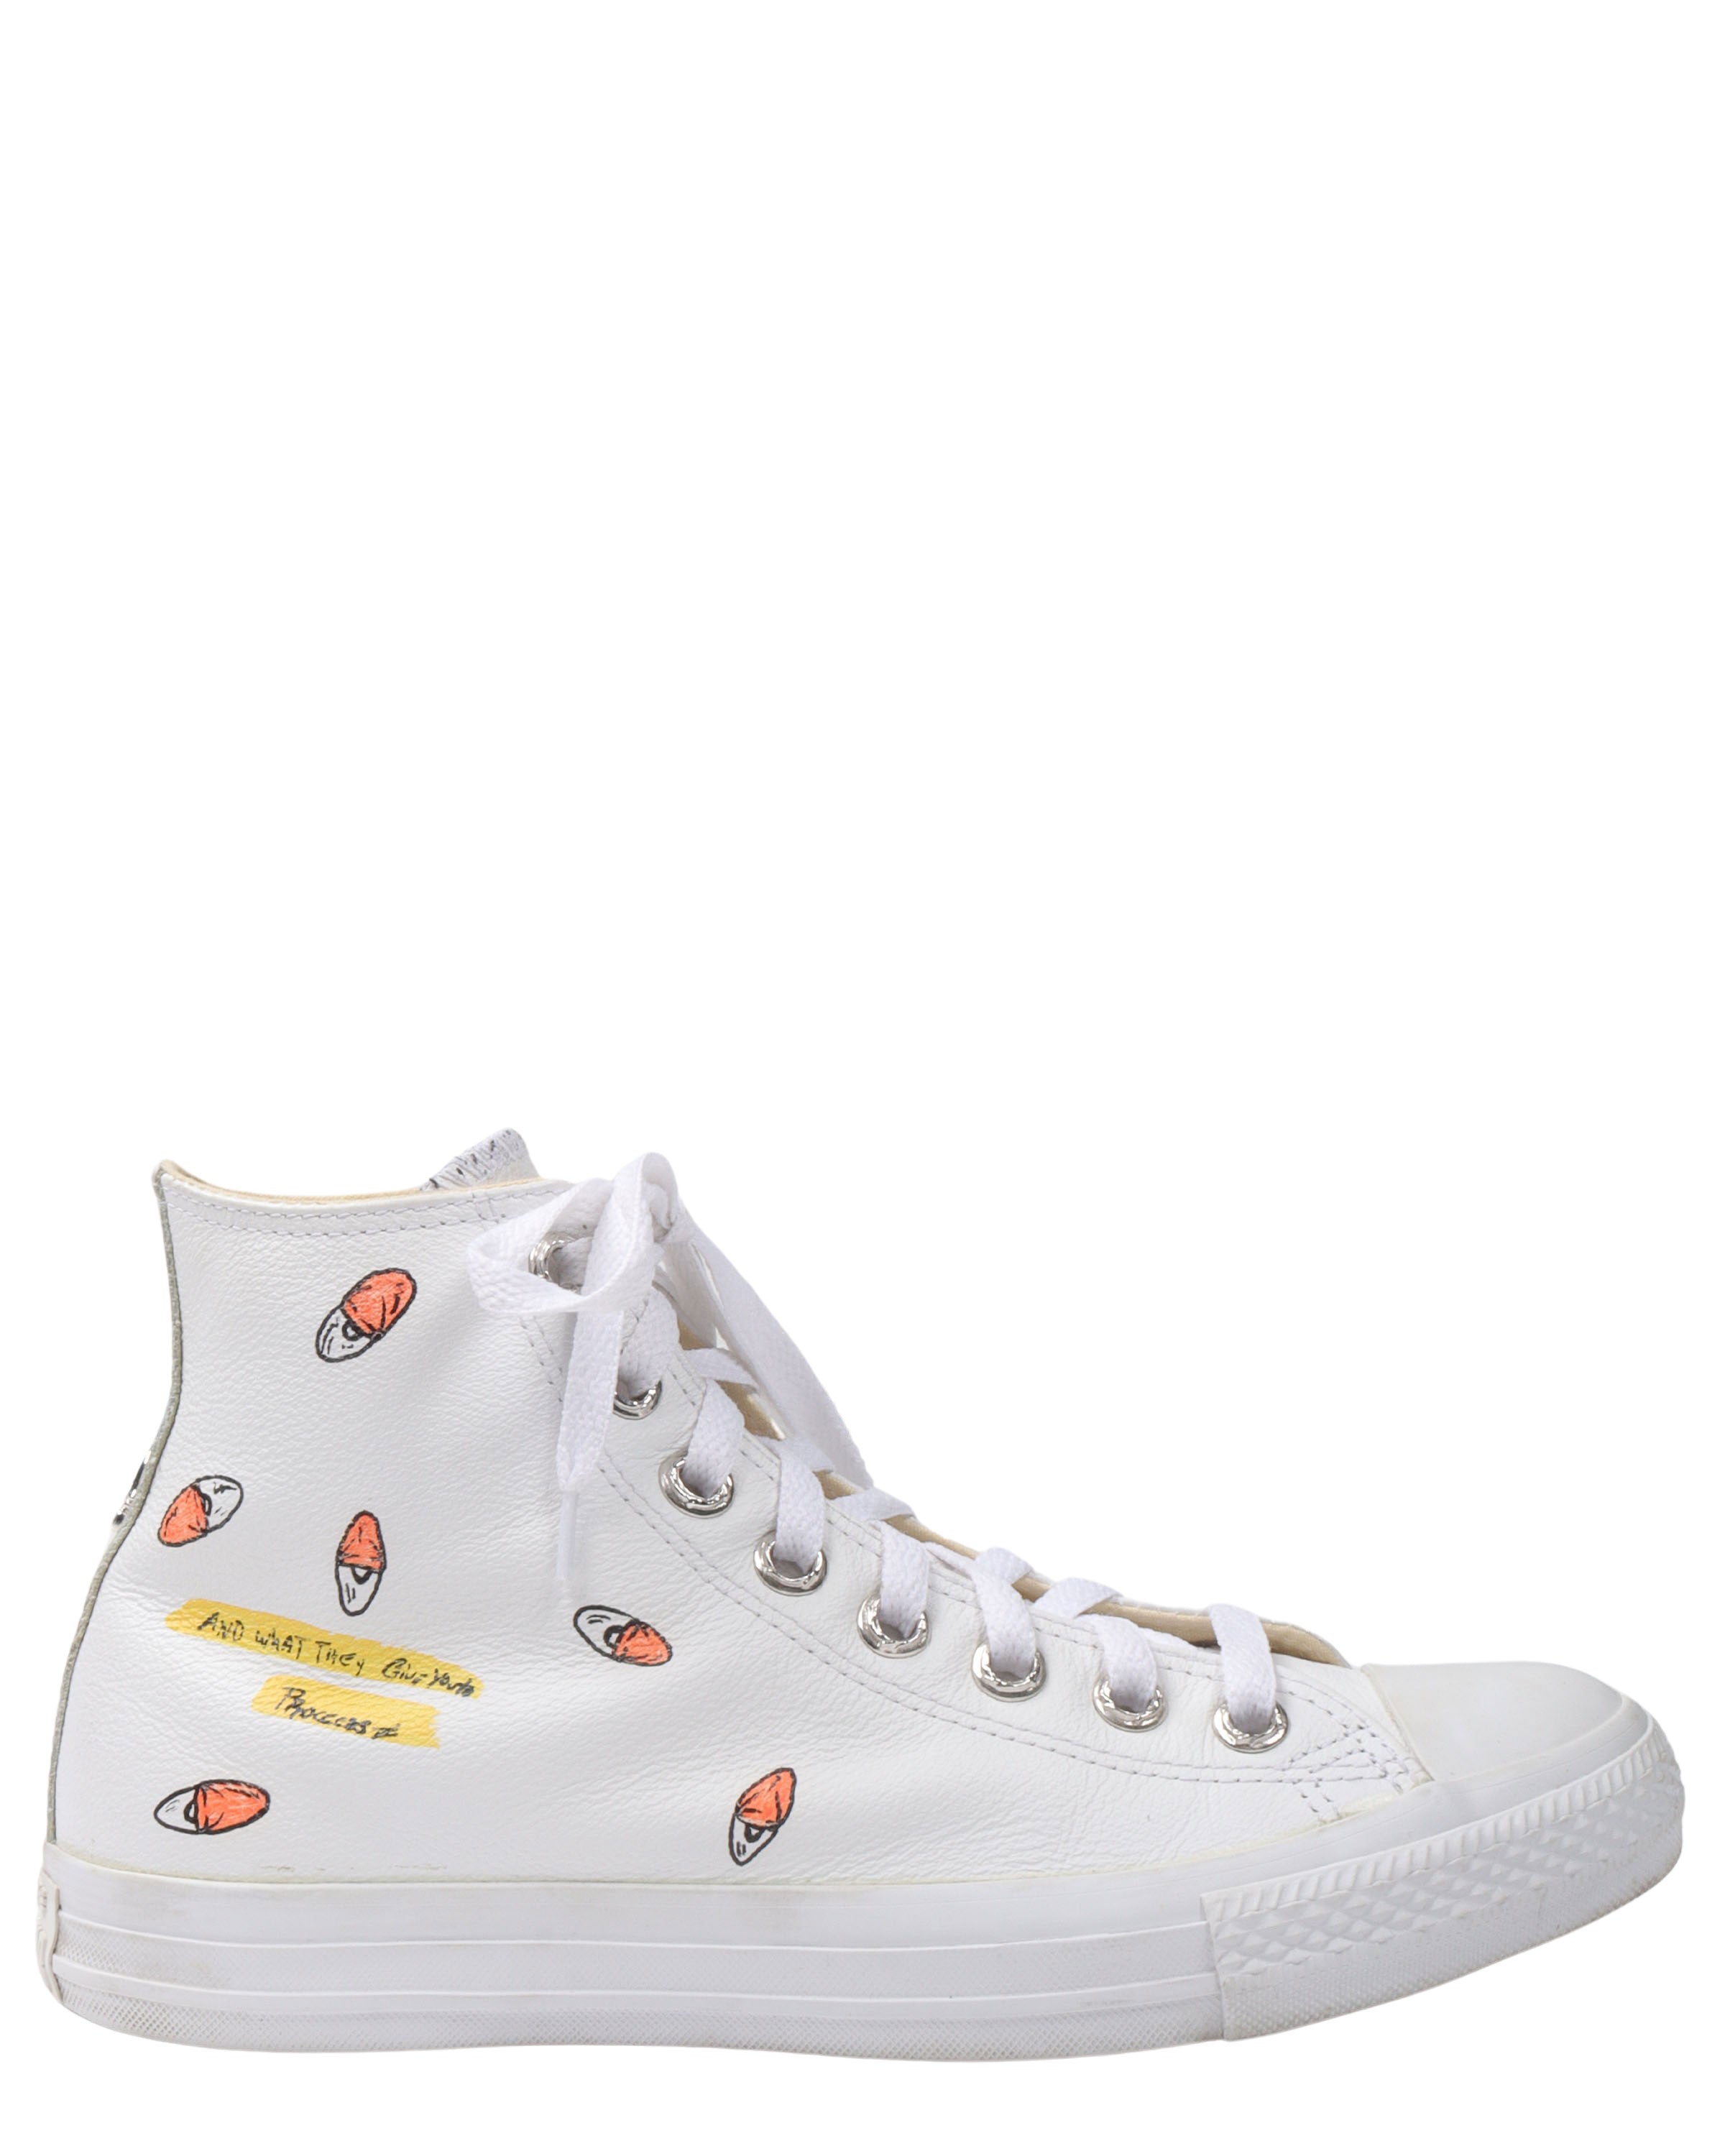 Matty Boy Hand Painted Leather Chuck Taylor Converse